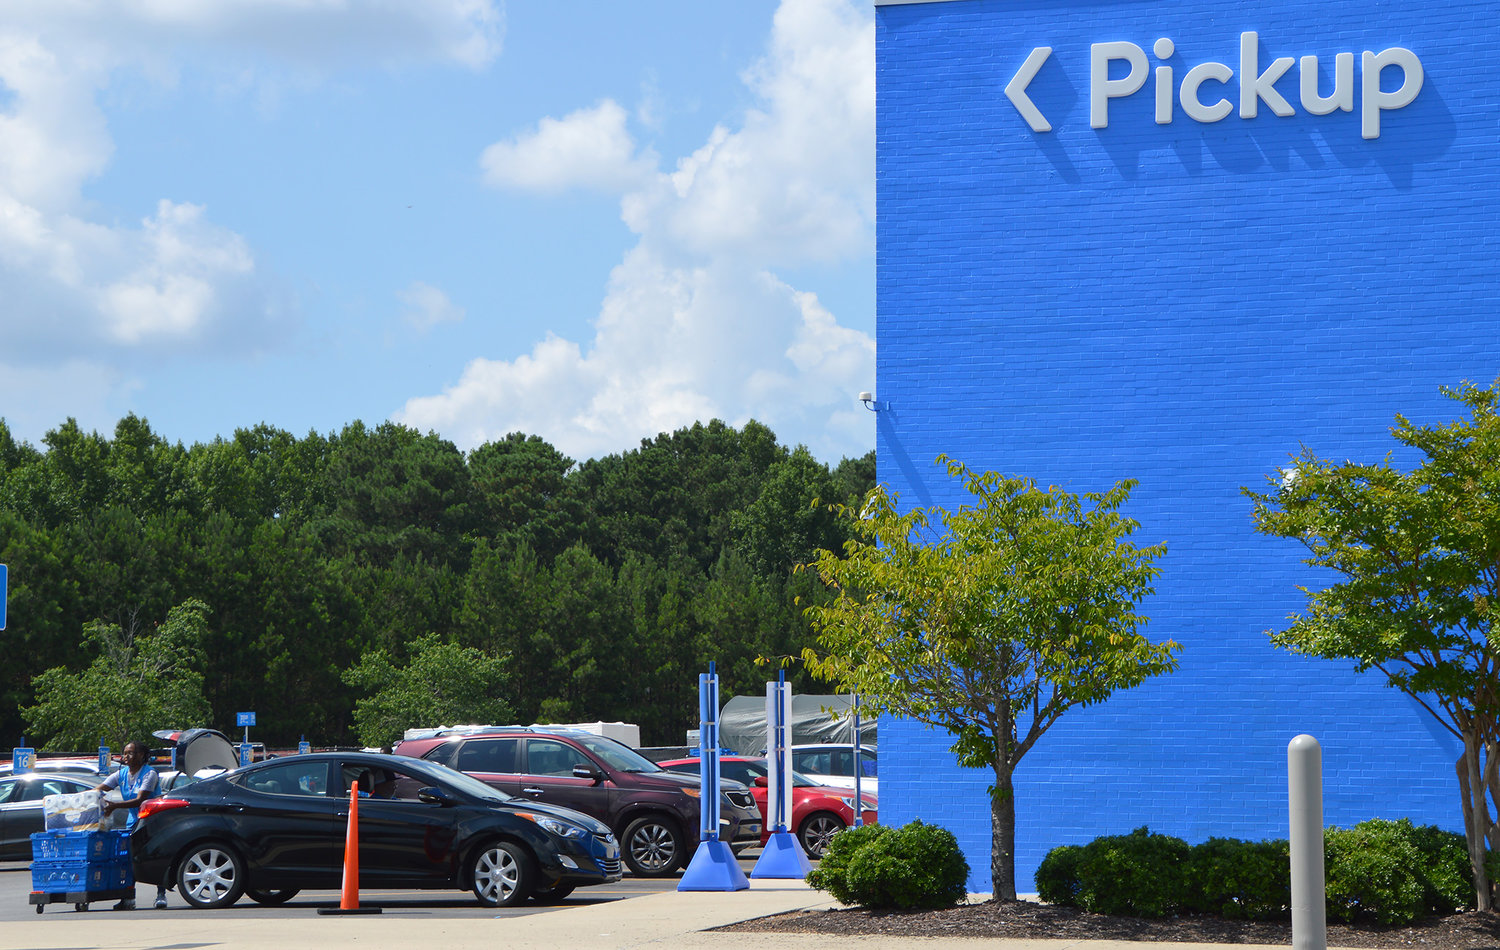 A Walmart employee loads a curbside pickup order into a customer's vehicle June 5, 2022, in Dallas, Ga. (Christian Index/Henry Durand, File)